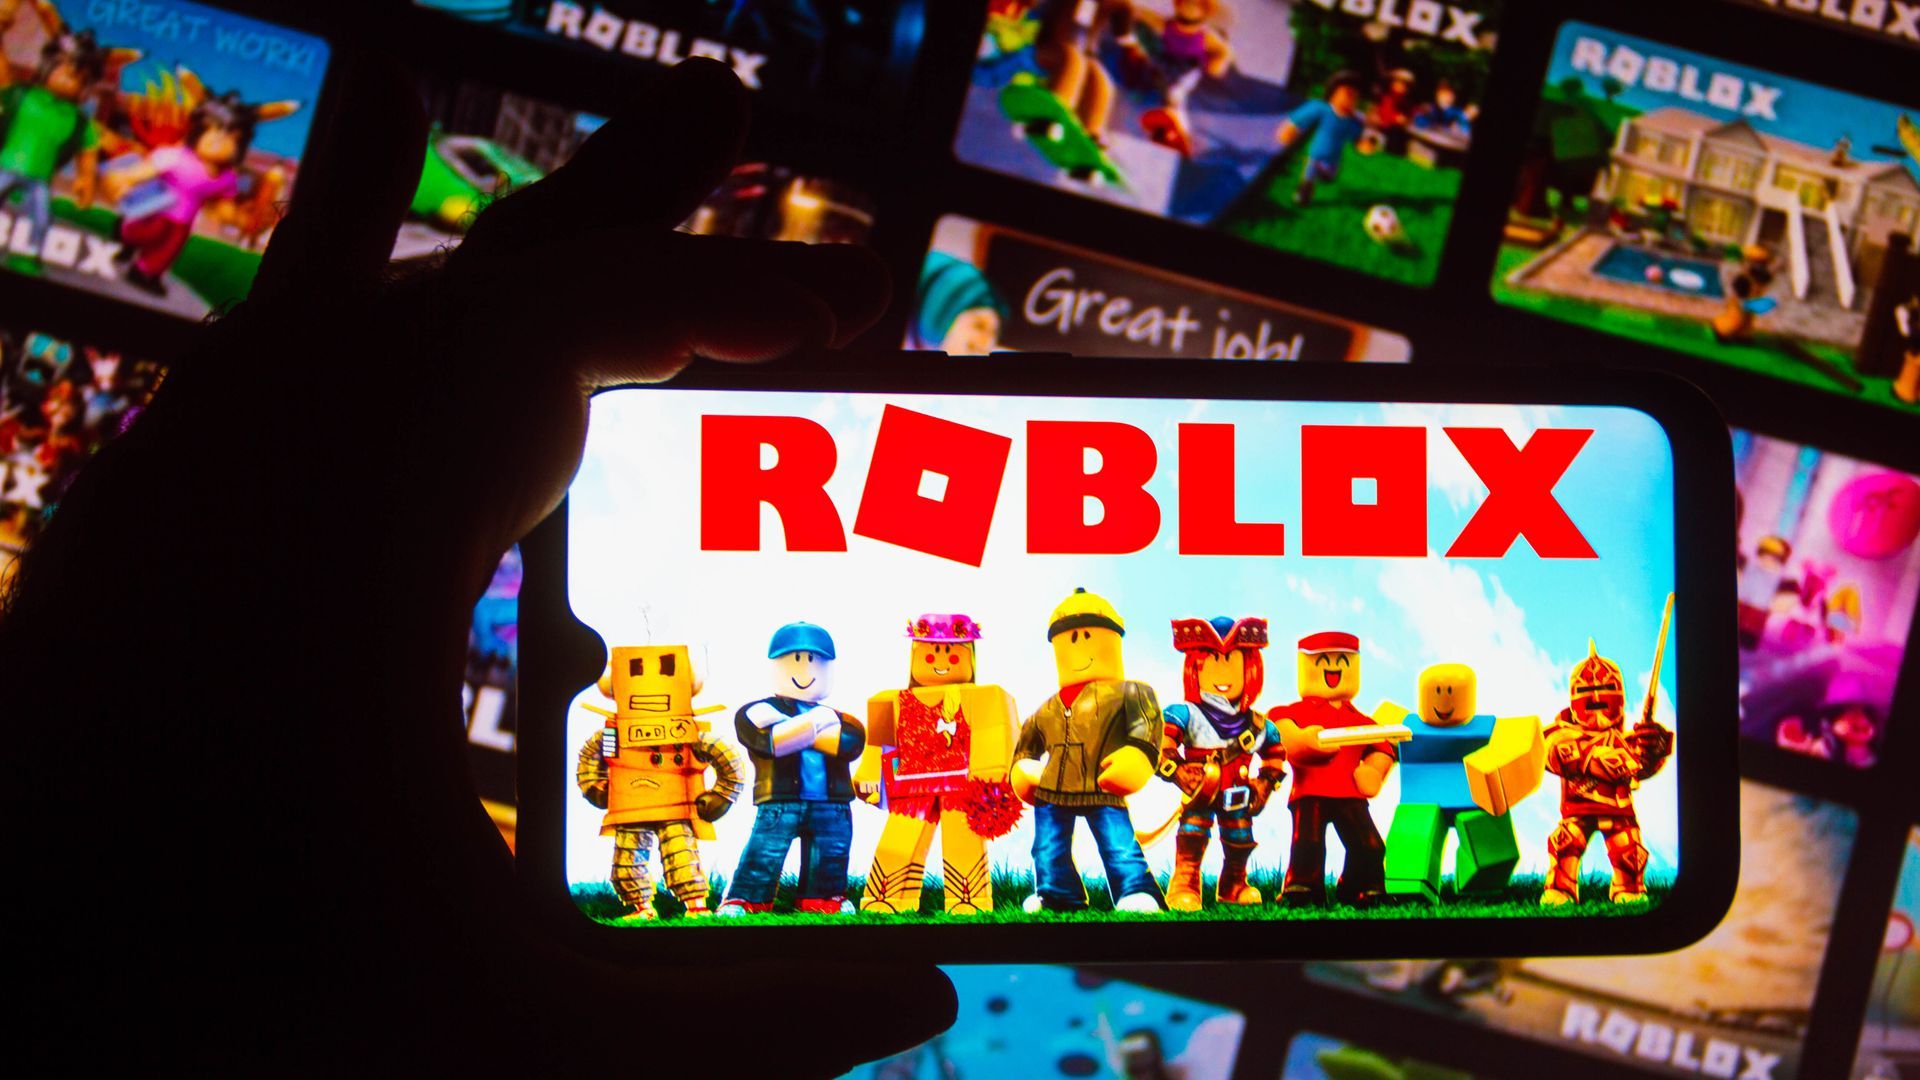 born to play roblox , forced to go to school | Poster